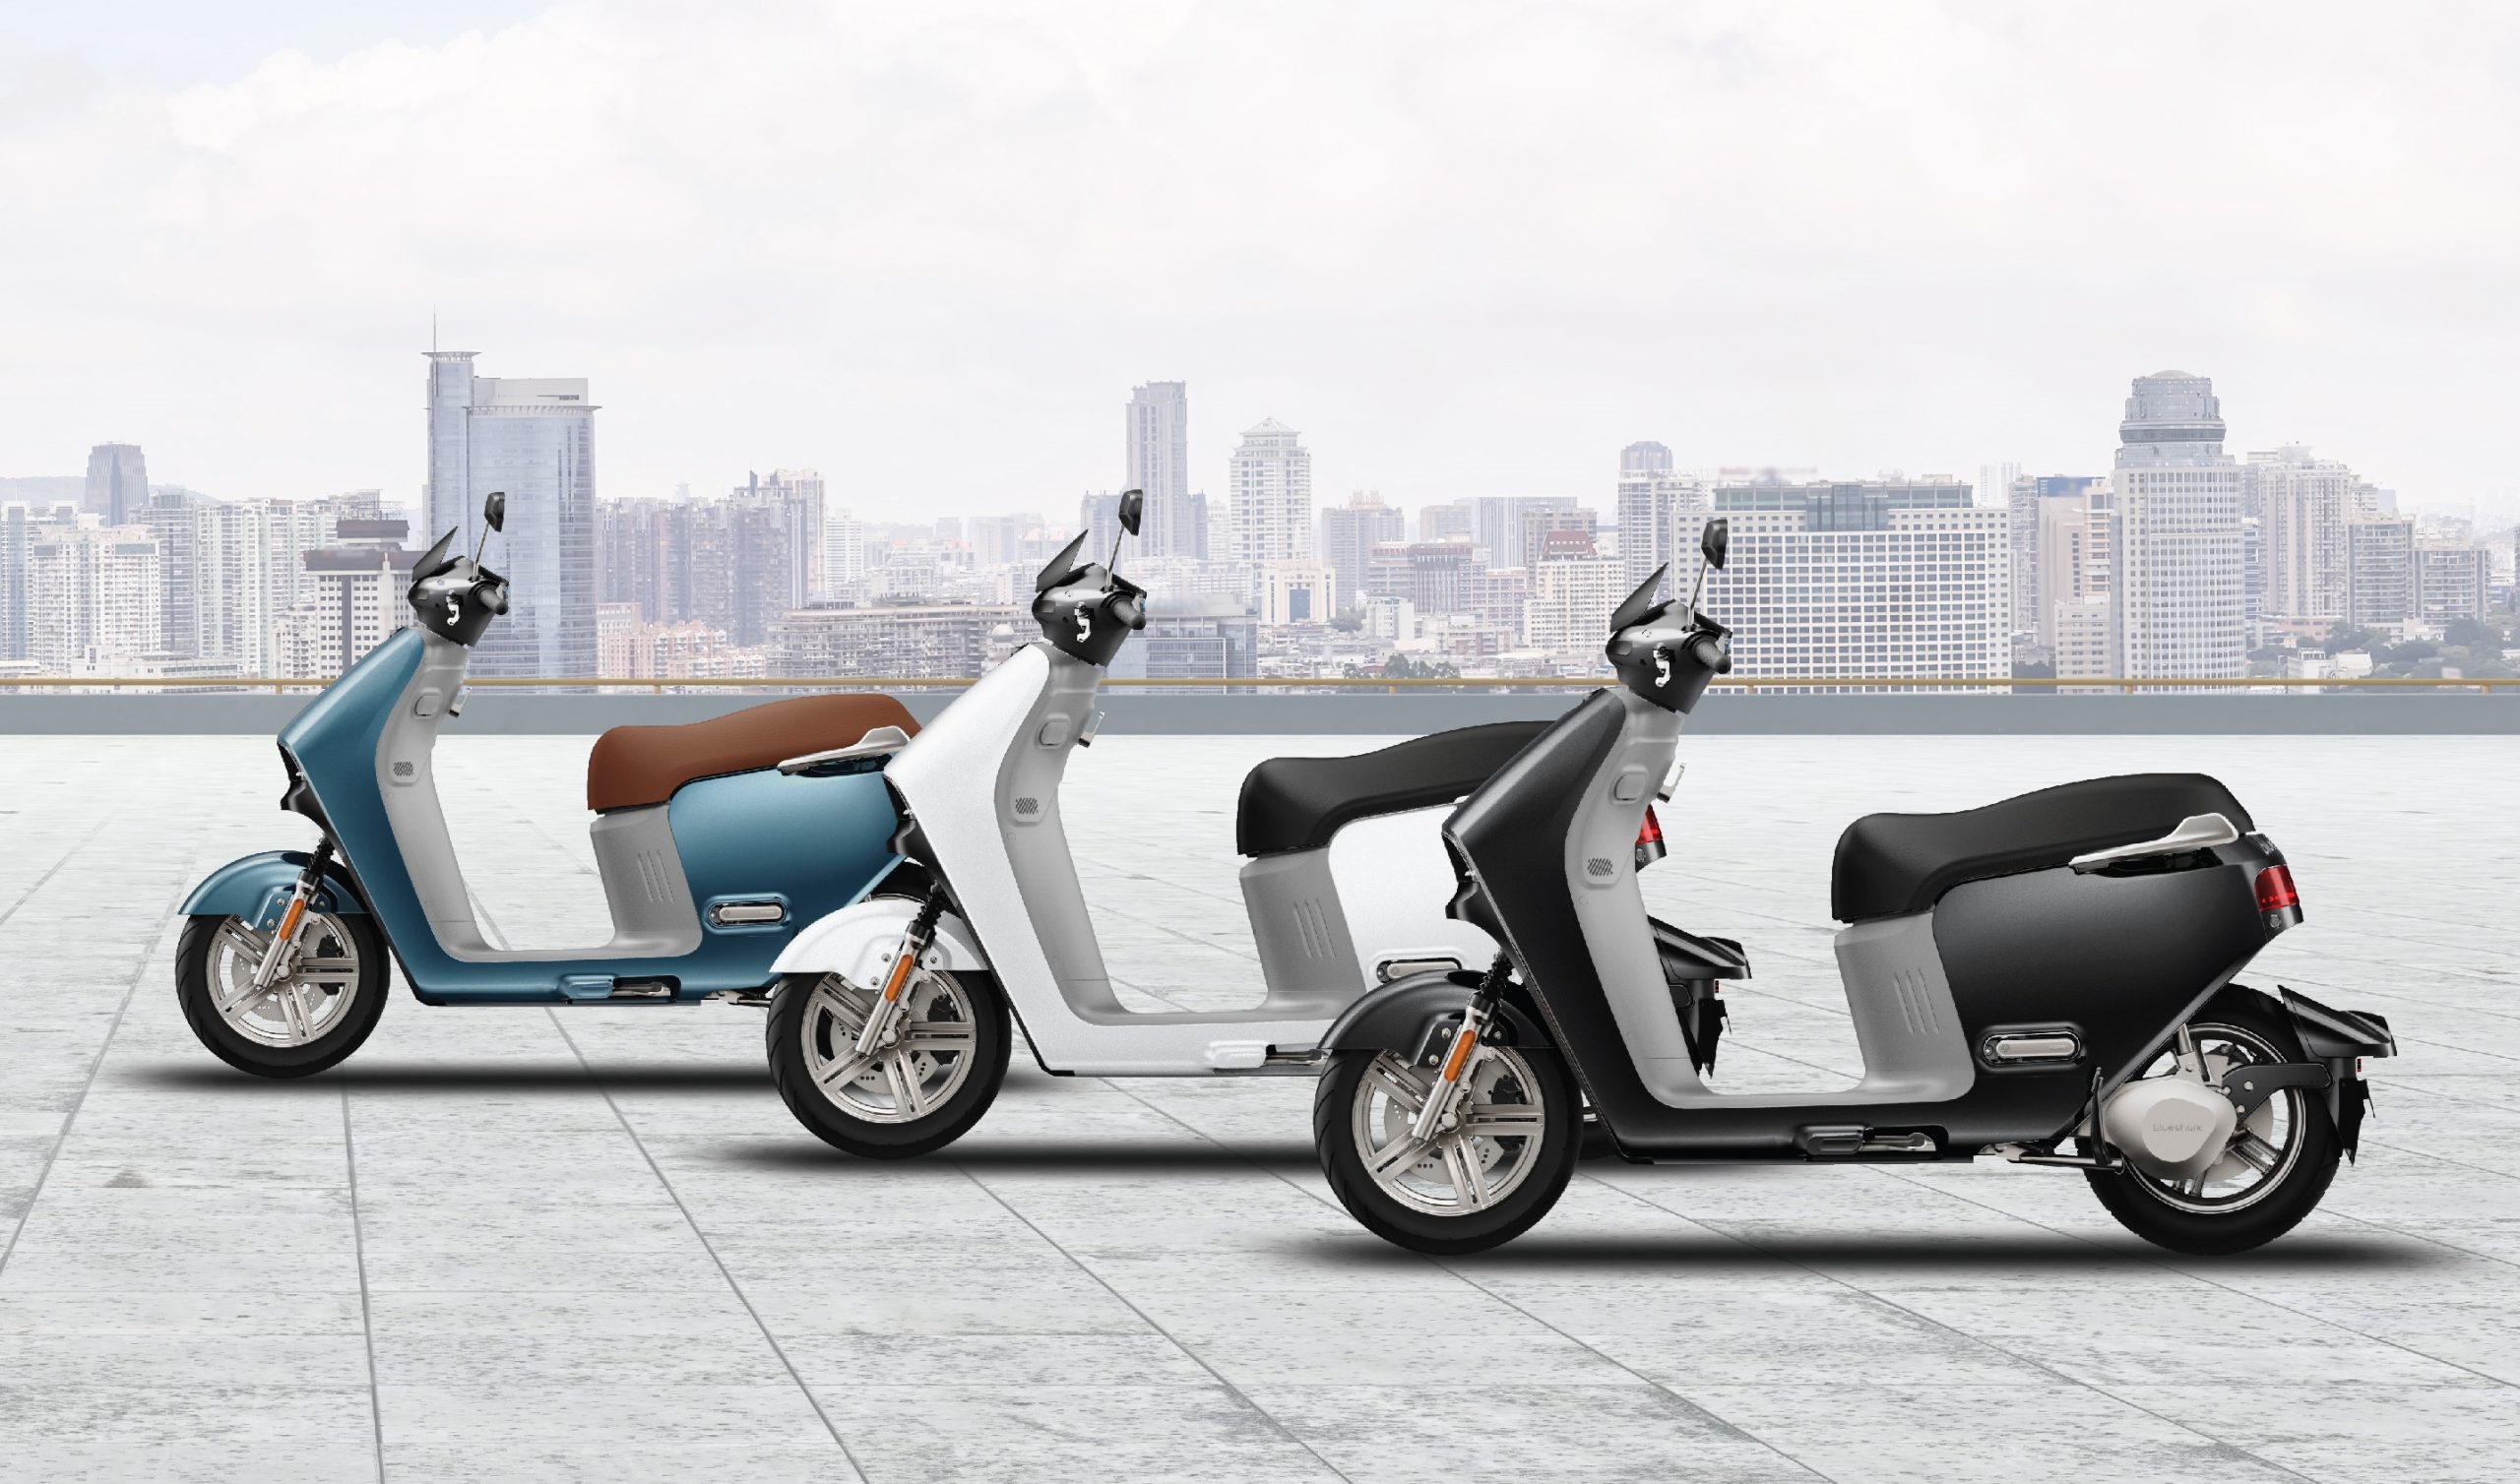 blueshark offers alternative personal mobility with zero emissions